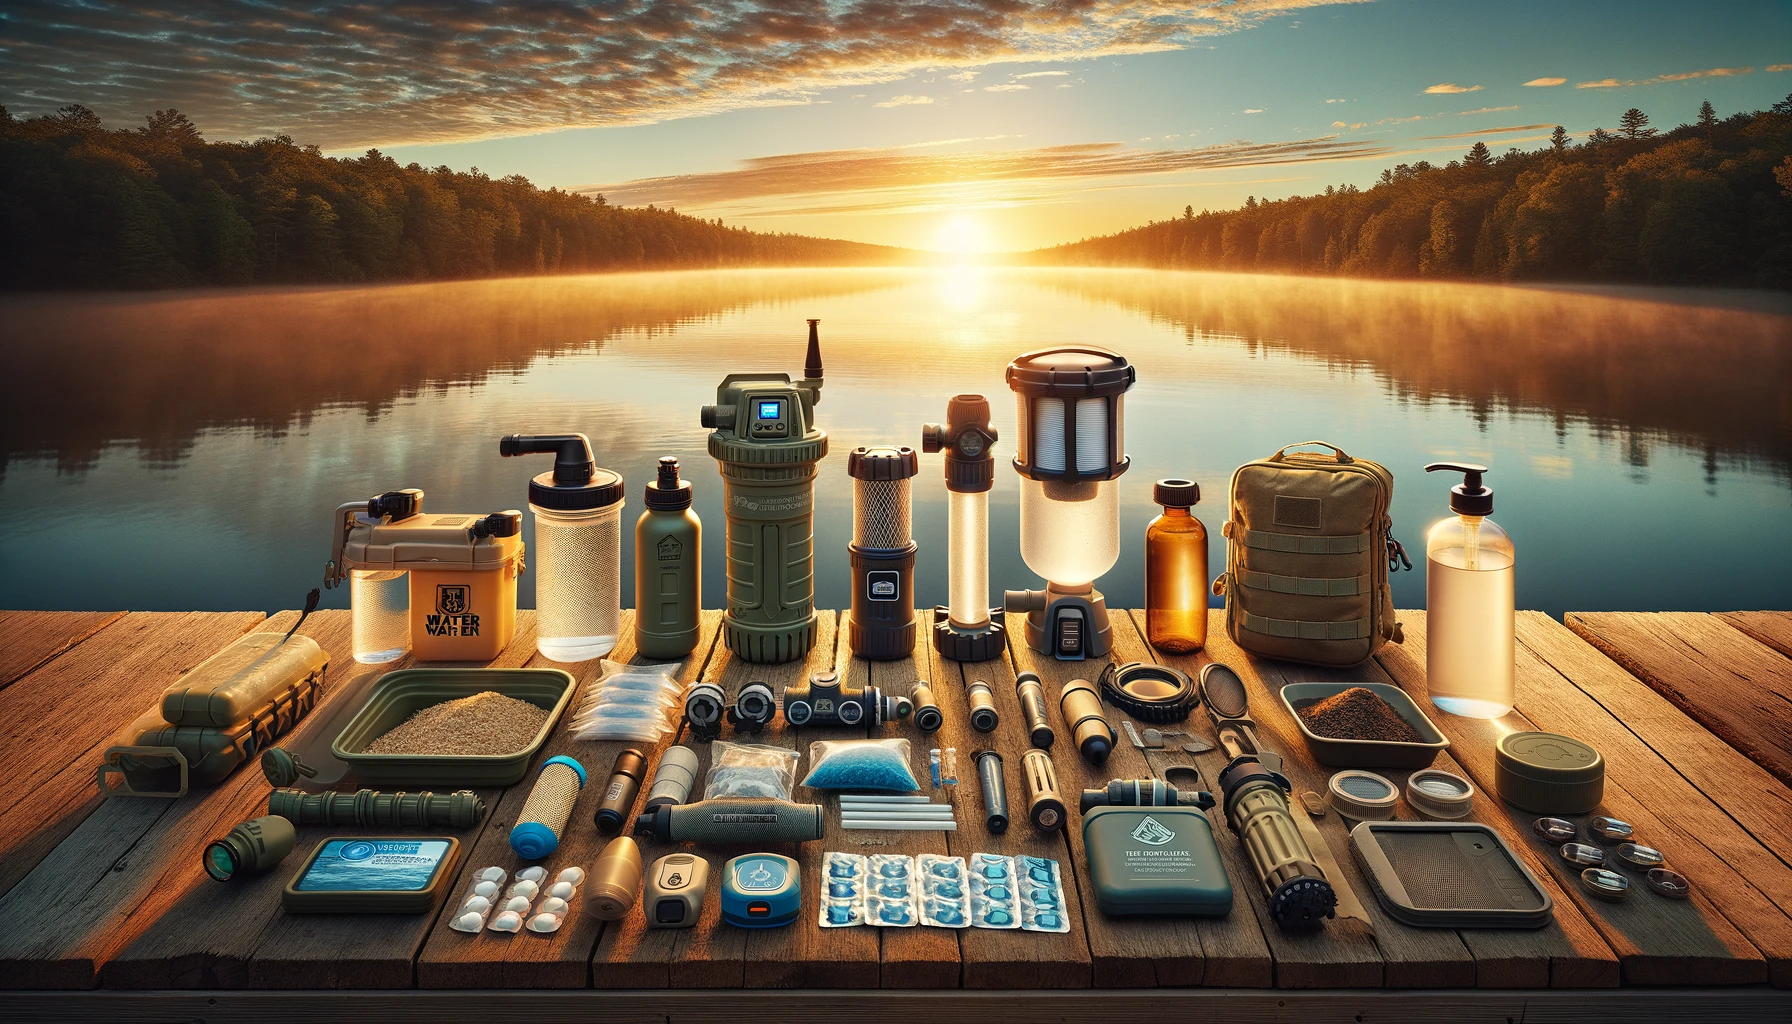 Water survival essentials displayed on a wooden dock extending into a serene lake at sunrise, including a portable water filter, UV purifier pen, chemical tablets, collapsible and stainless steel bottles, and a sand-charcoal filter setup. The golden sunrise illuminates the critical survival gear, symbolizing hope and the importance of securing clean drinking water. The peaceful lake backdrop contrasts with the vital preparedness tools, emphasizing the necessity of water purification and storage for survival in any environment